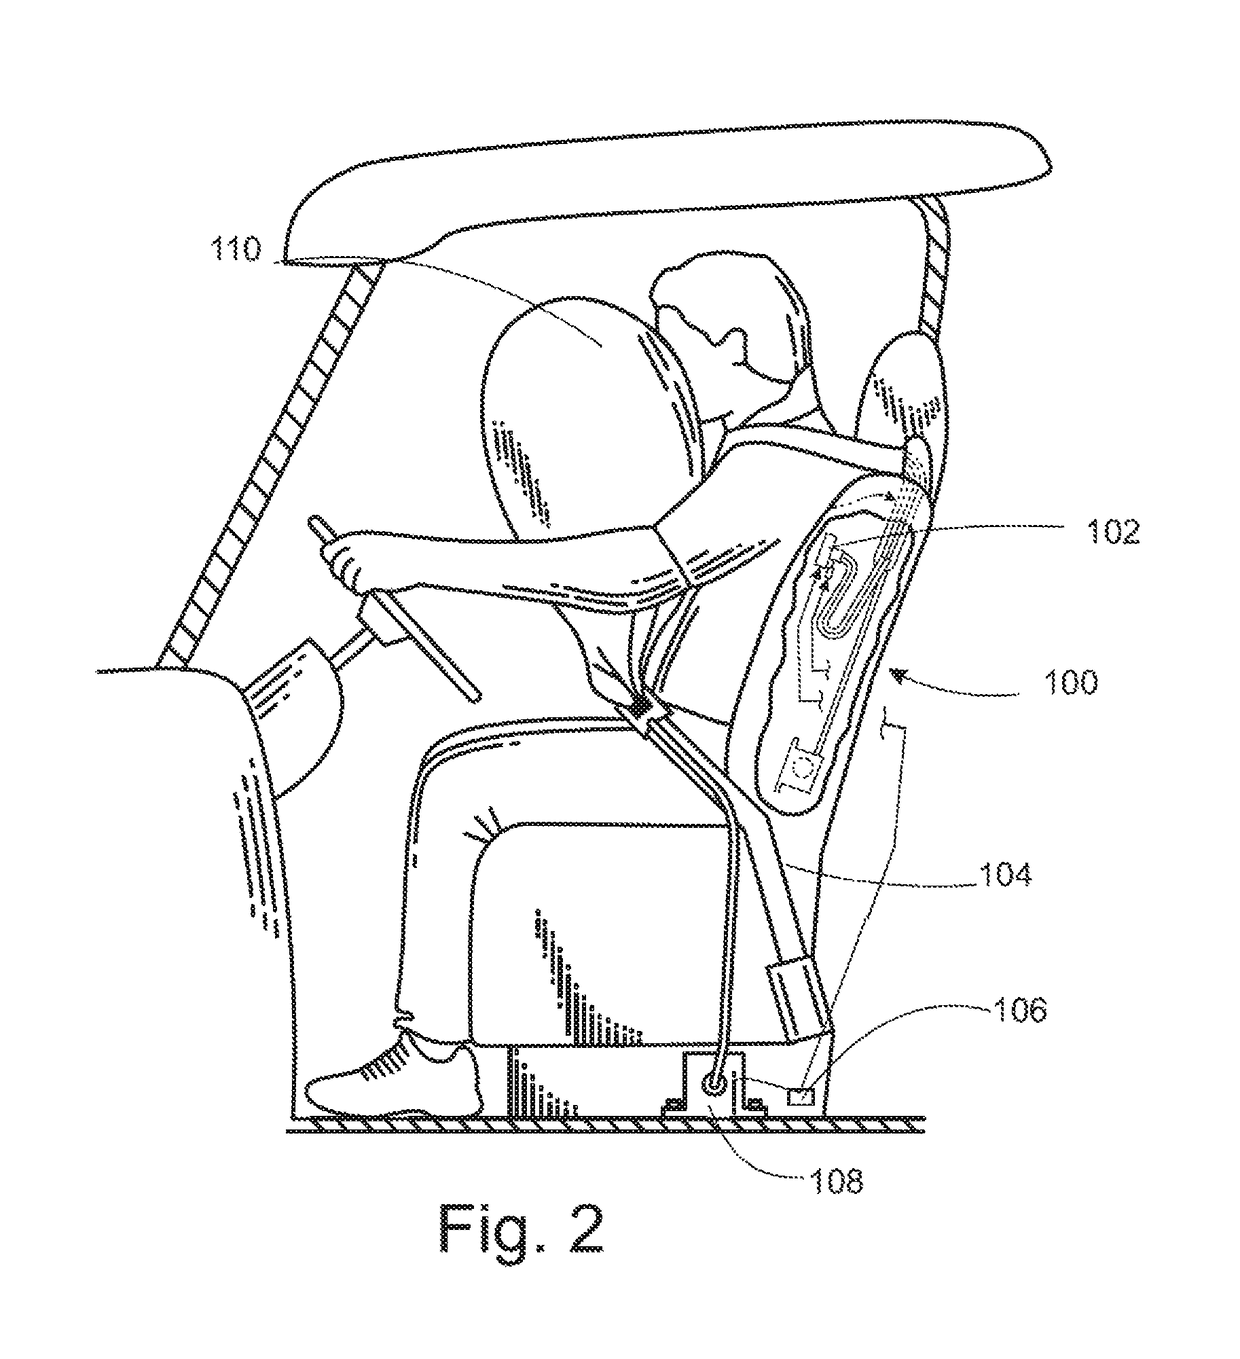 Method for controlling travel of golf carts and all-terrain vehicles